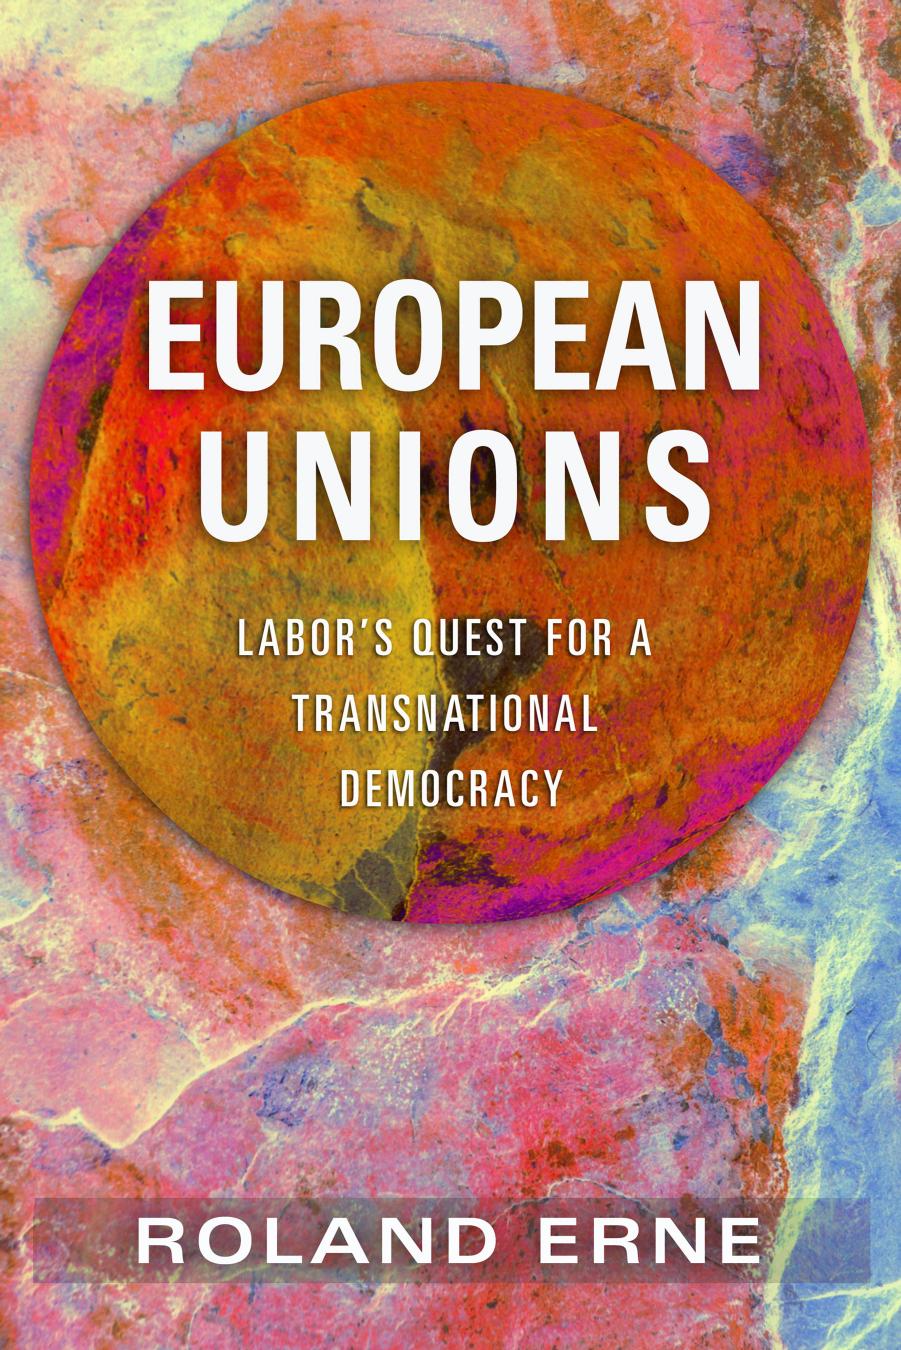 European Unions: Labor's Quest for a Transnational Democracy by Roland Erne